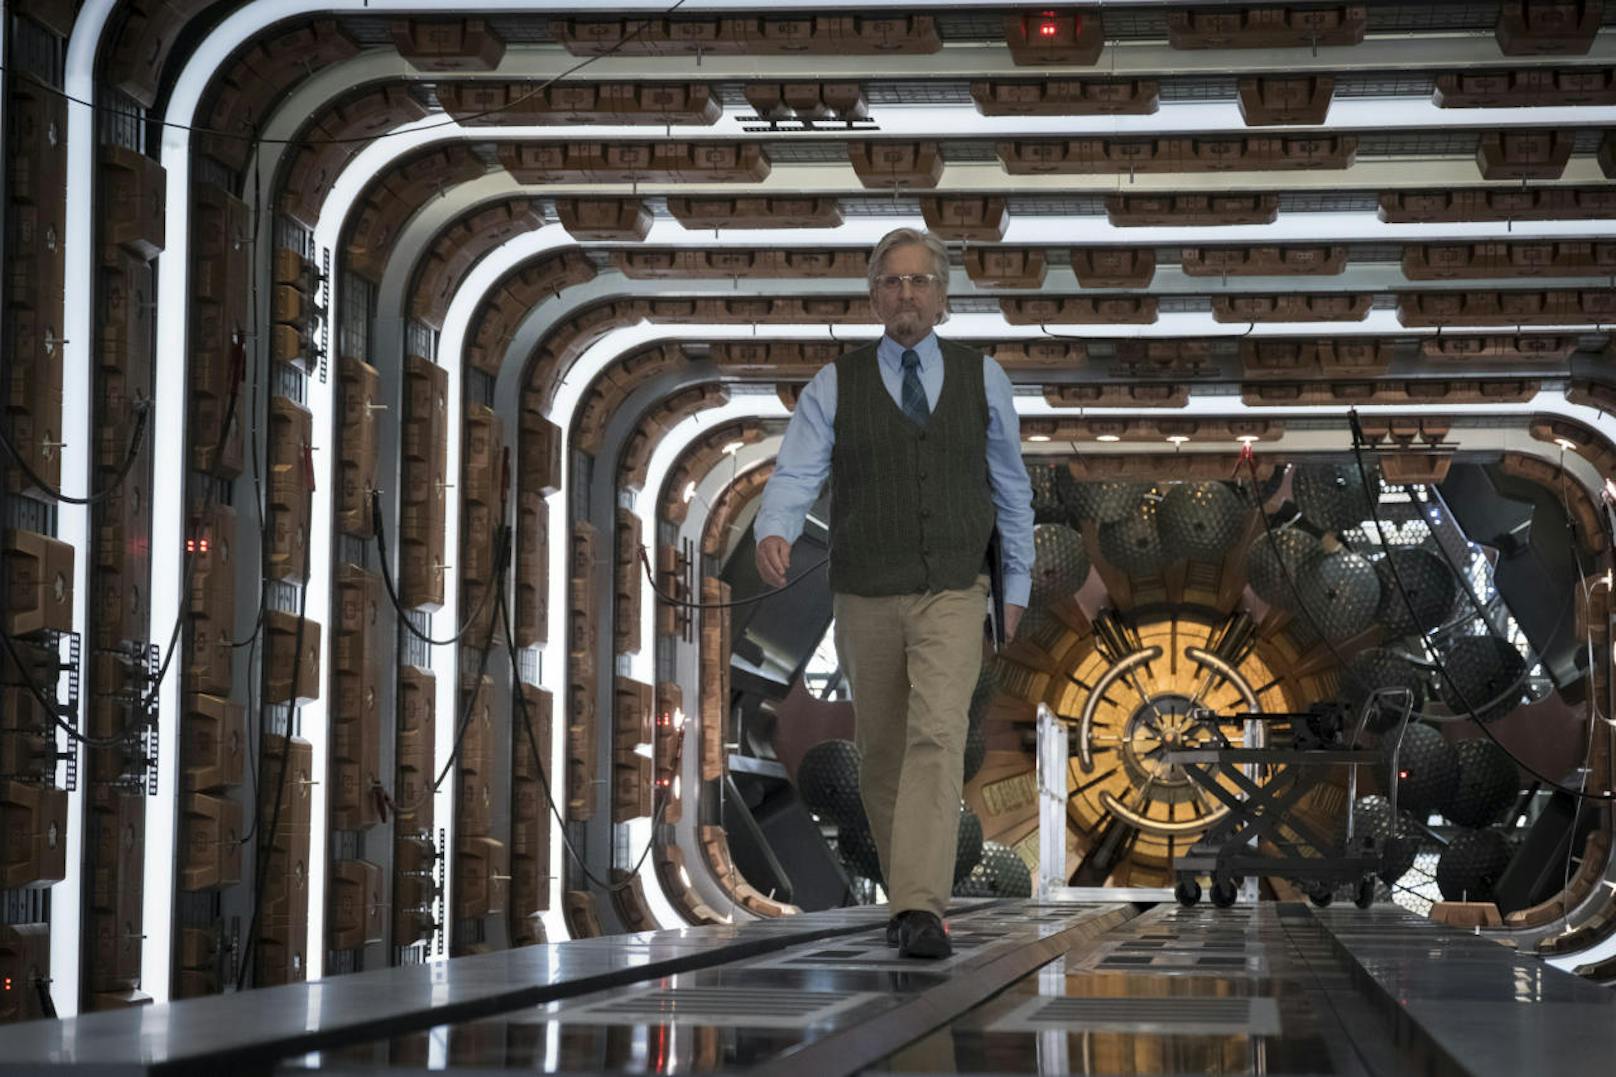 Hank Pym (Michael Douglas) in "Ant-Man and the Wasp". 
